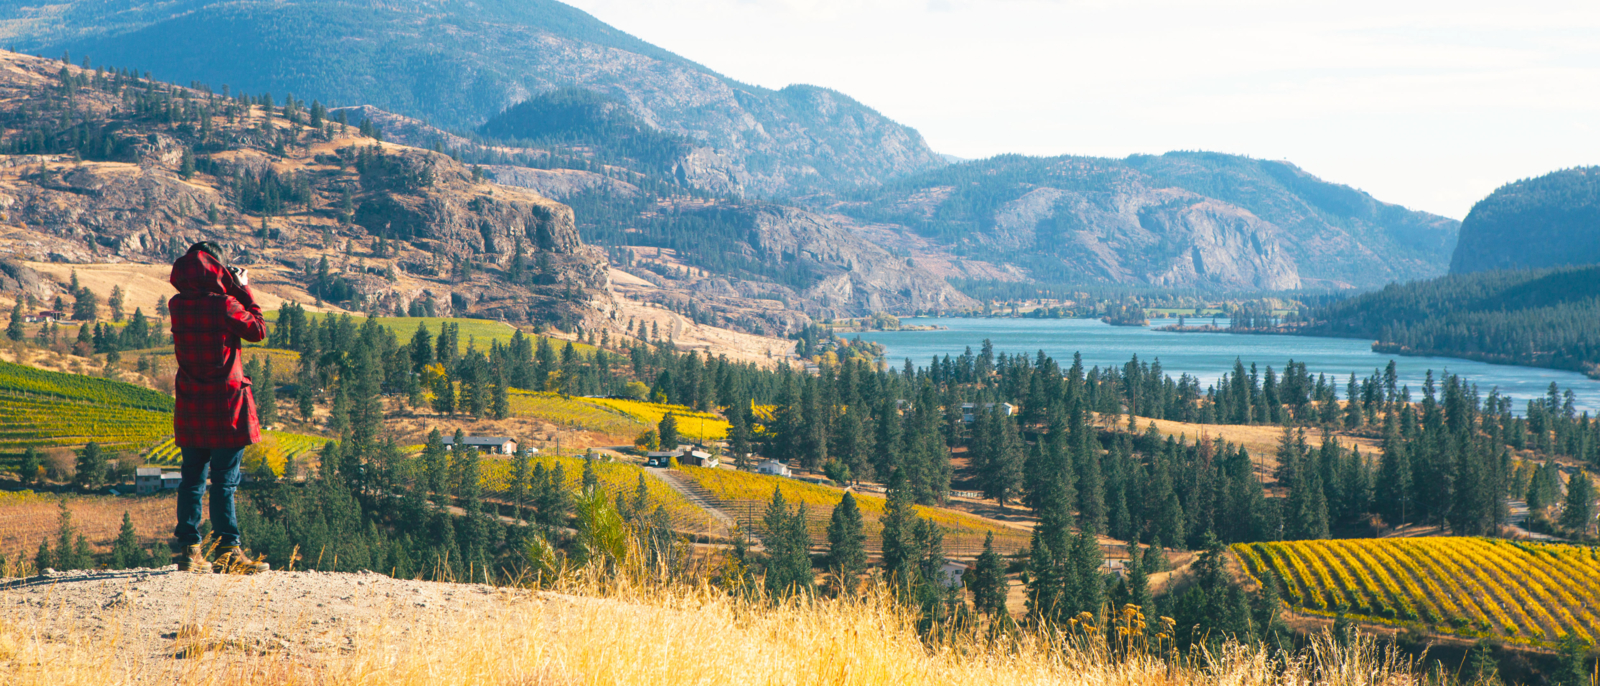 A young adult woman tourist taking a photography of the vineyards overlooking Vaseux Lake, Okanagan Falls, British Columbia, Canada.